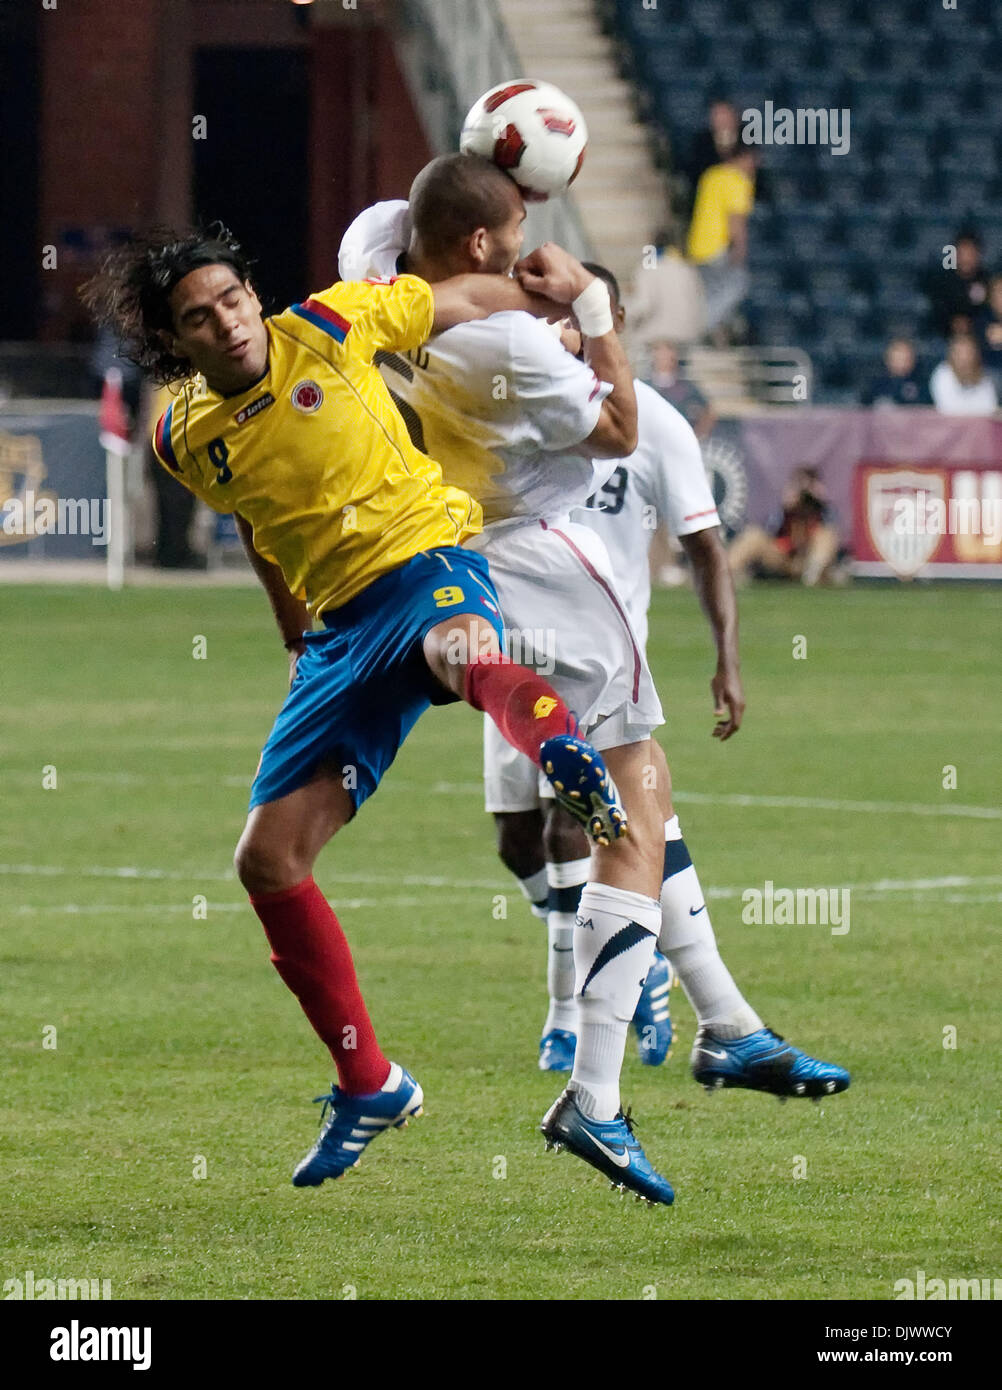 Oct 12, 2010 - Chester, Pennsylvania, U.S. - MLS Soccer - Colombia's FALCAU GARCIA and USA'S OGUCHI ONYEWU fight for the ball. The USA and Colombia played an International Friendly match at PPL Park in Chester. (Credit Image: © Ricky Fitchett/ZUMApress.com) Stock Photo